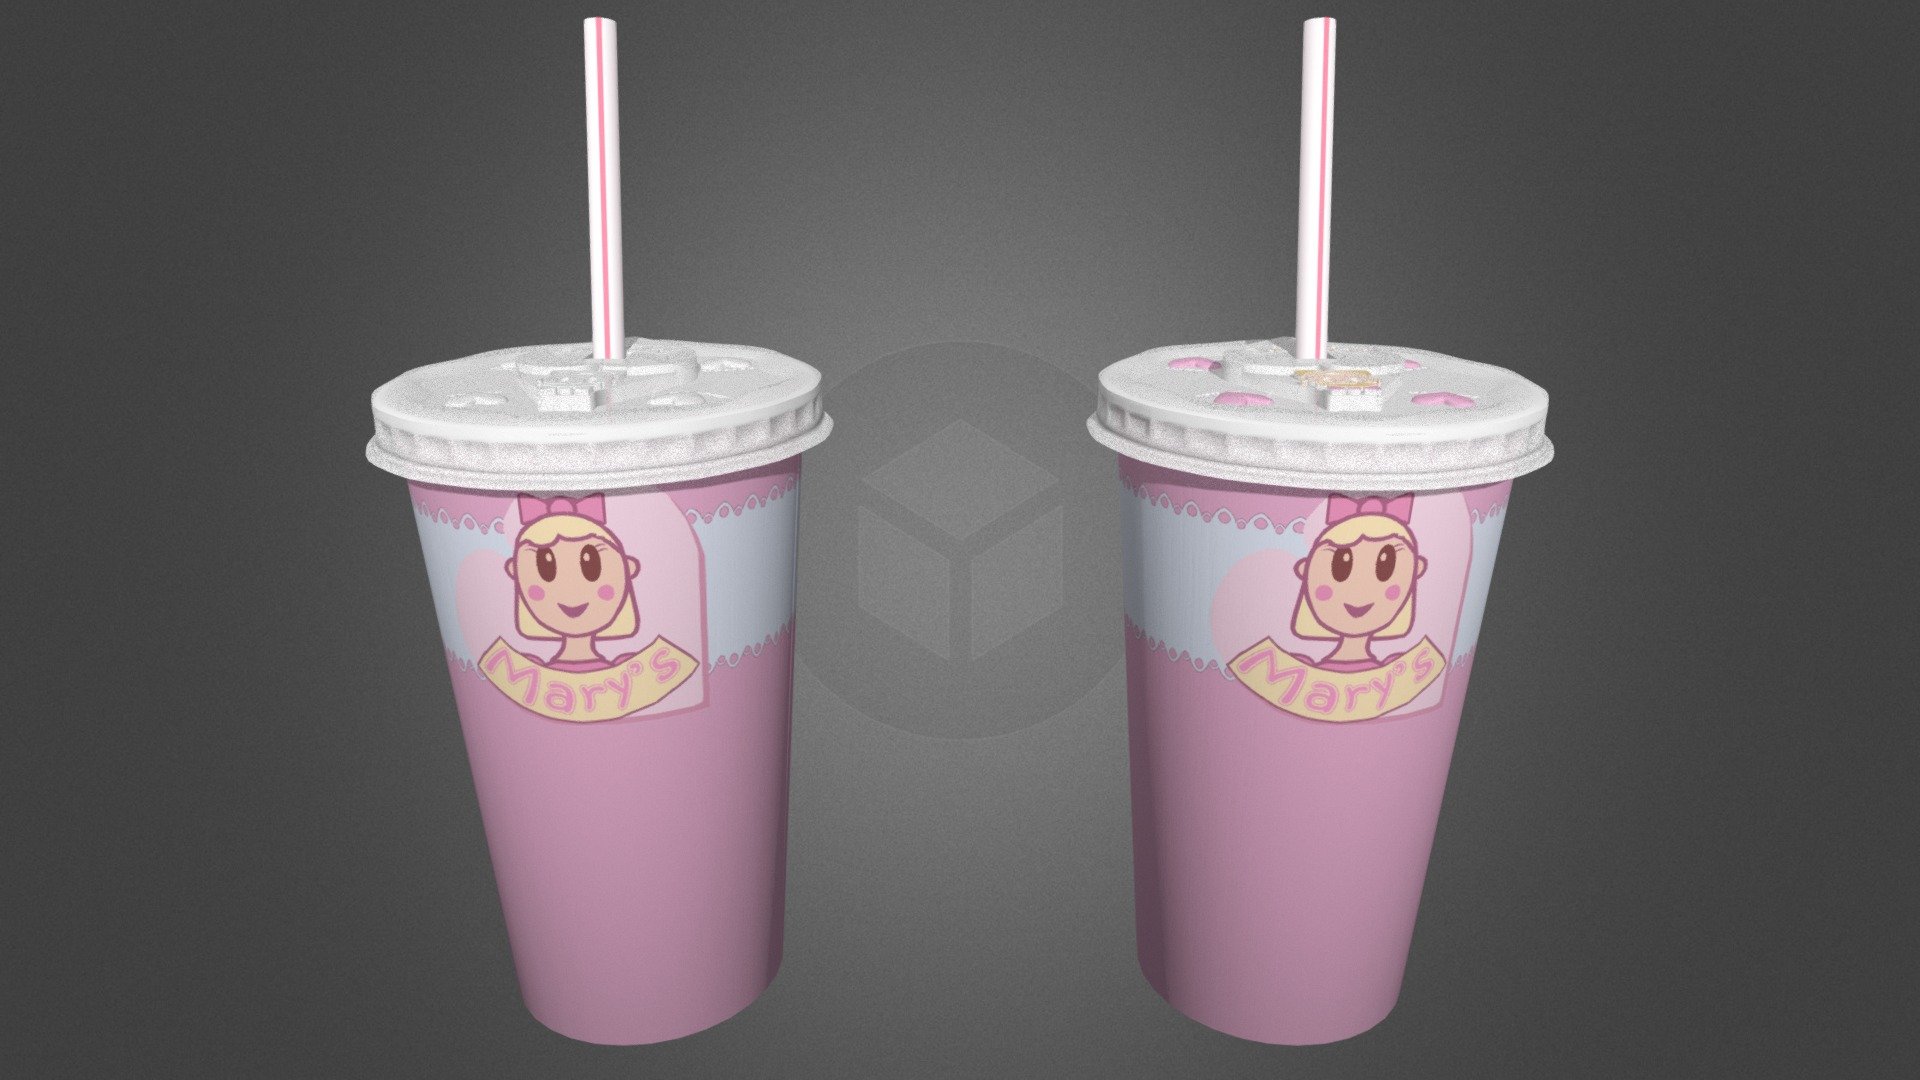 In Mary and Xane’s world, Xane Corp. owns a restaurant chain named “Mary’s“. Mary enjoys drinking from these cups, most likely due to their cuteness or them having her face on them. The cups used by the restaurant are inspired by both McDonald’s and the old Wendy’s design, the latter very obvious when looking at the cup’s lid.

This is the new version of the cup, modelled using Blender v3.12, using SVG (vector) versions of the lid's design layers to give the cute Mary's logo design smoother edges that more accurately resemble its intended appearance, compared to the old model's &ldquo;low-resolution